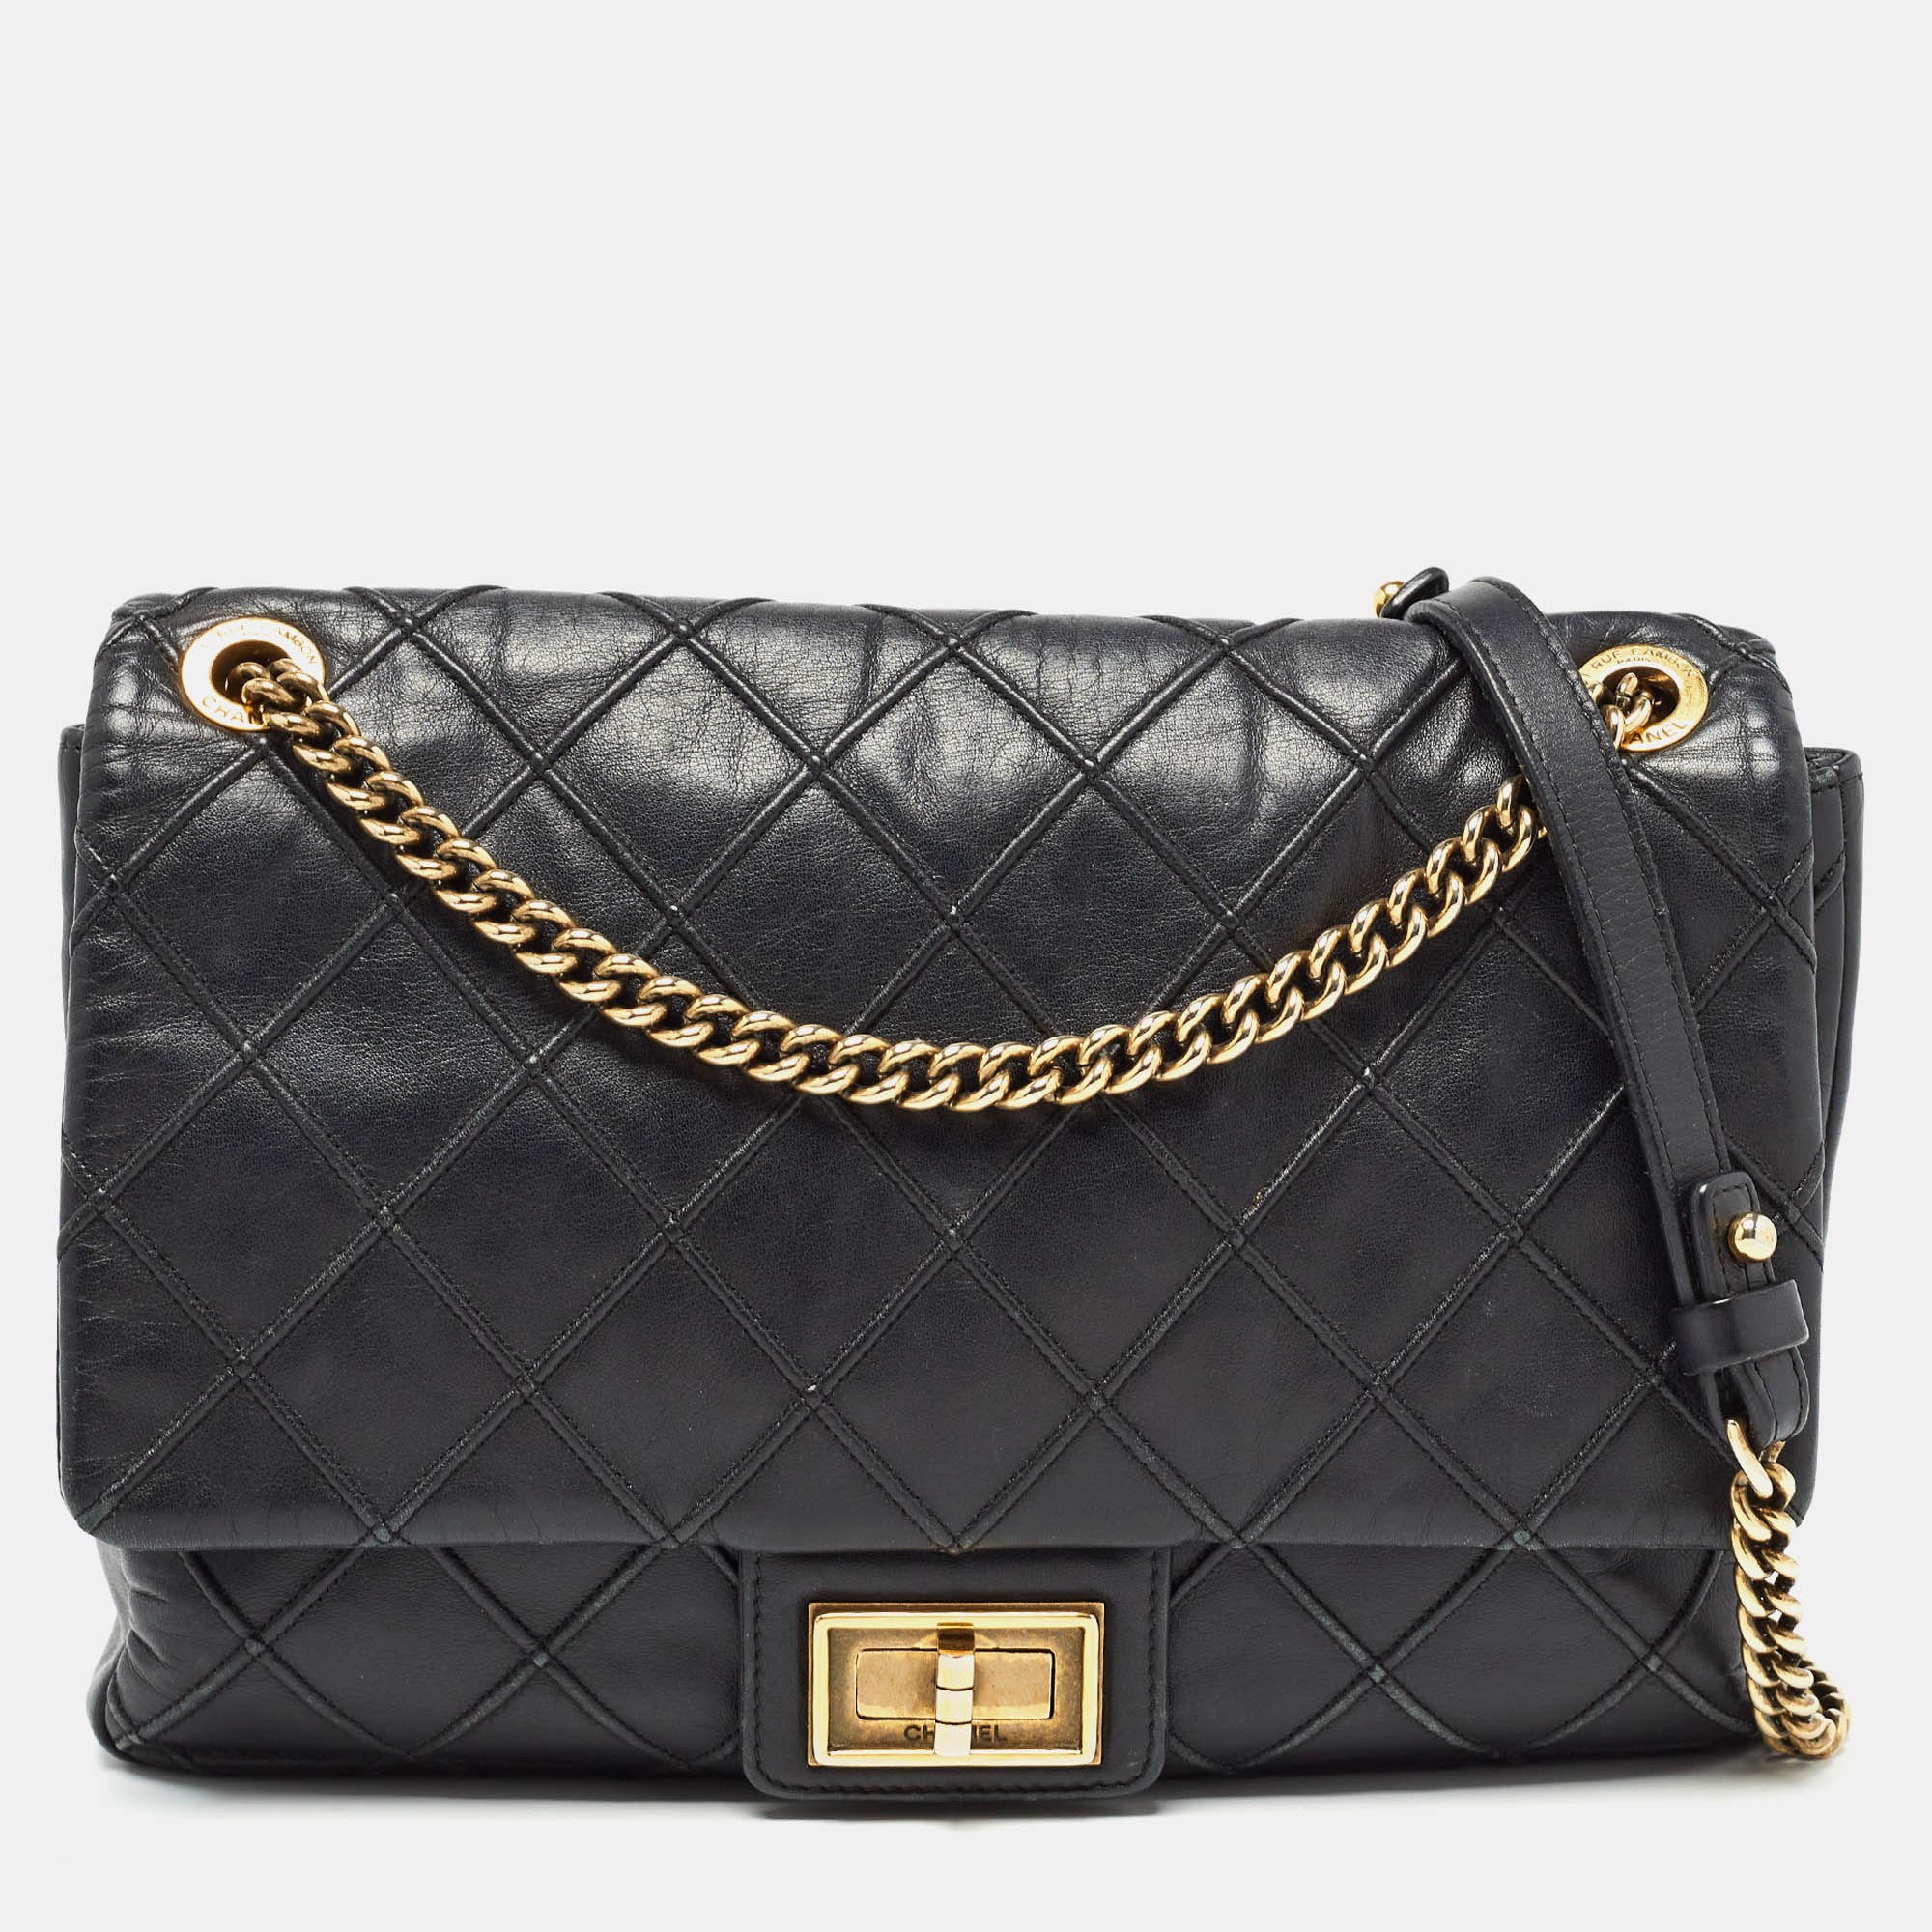 

Chanel Black Quilted Leather Medium Cosmos Flap Bag